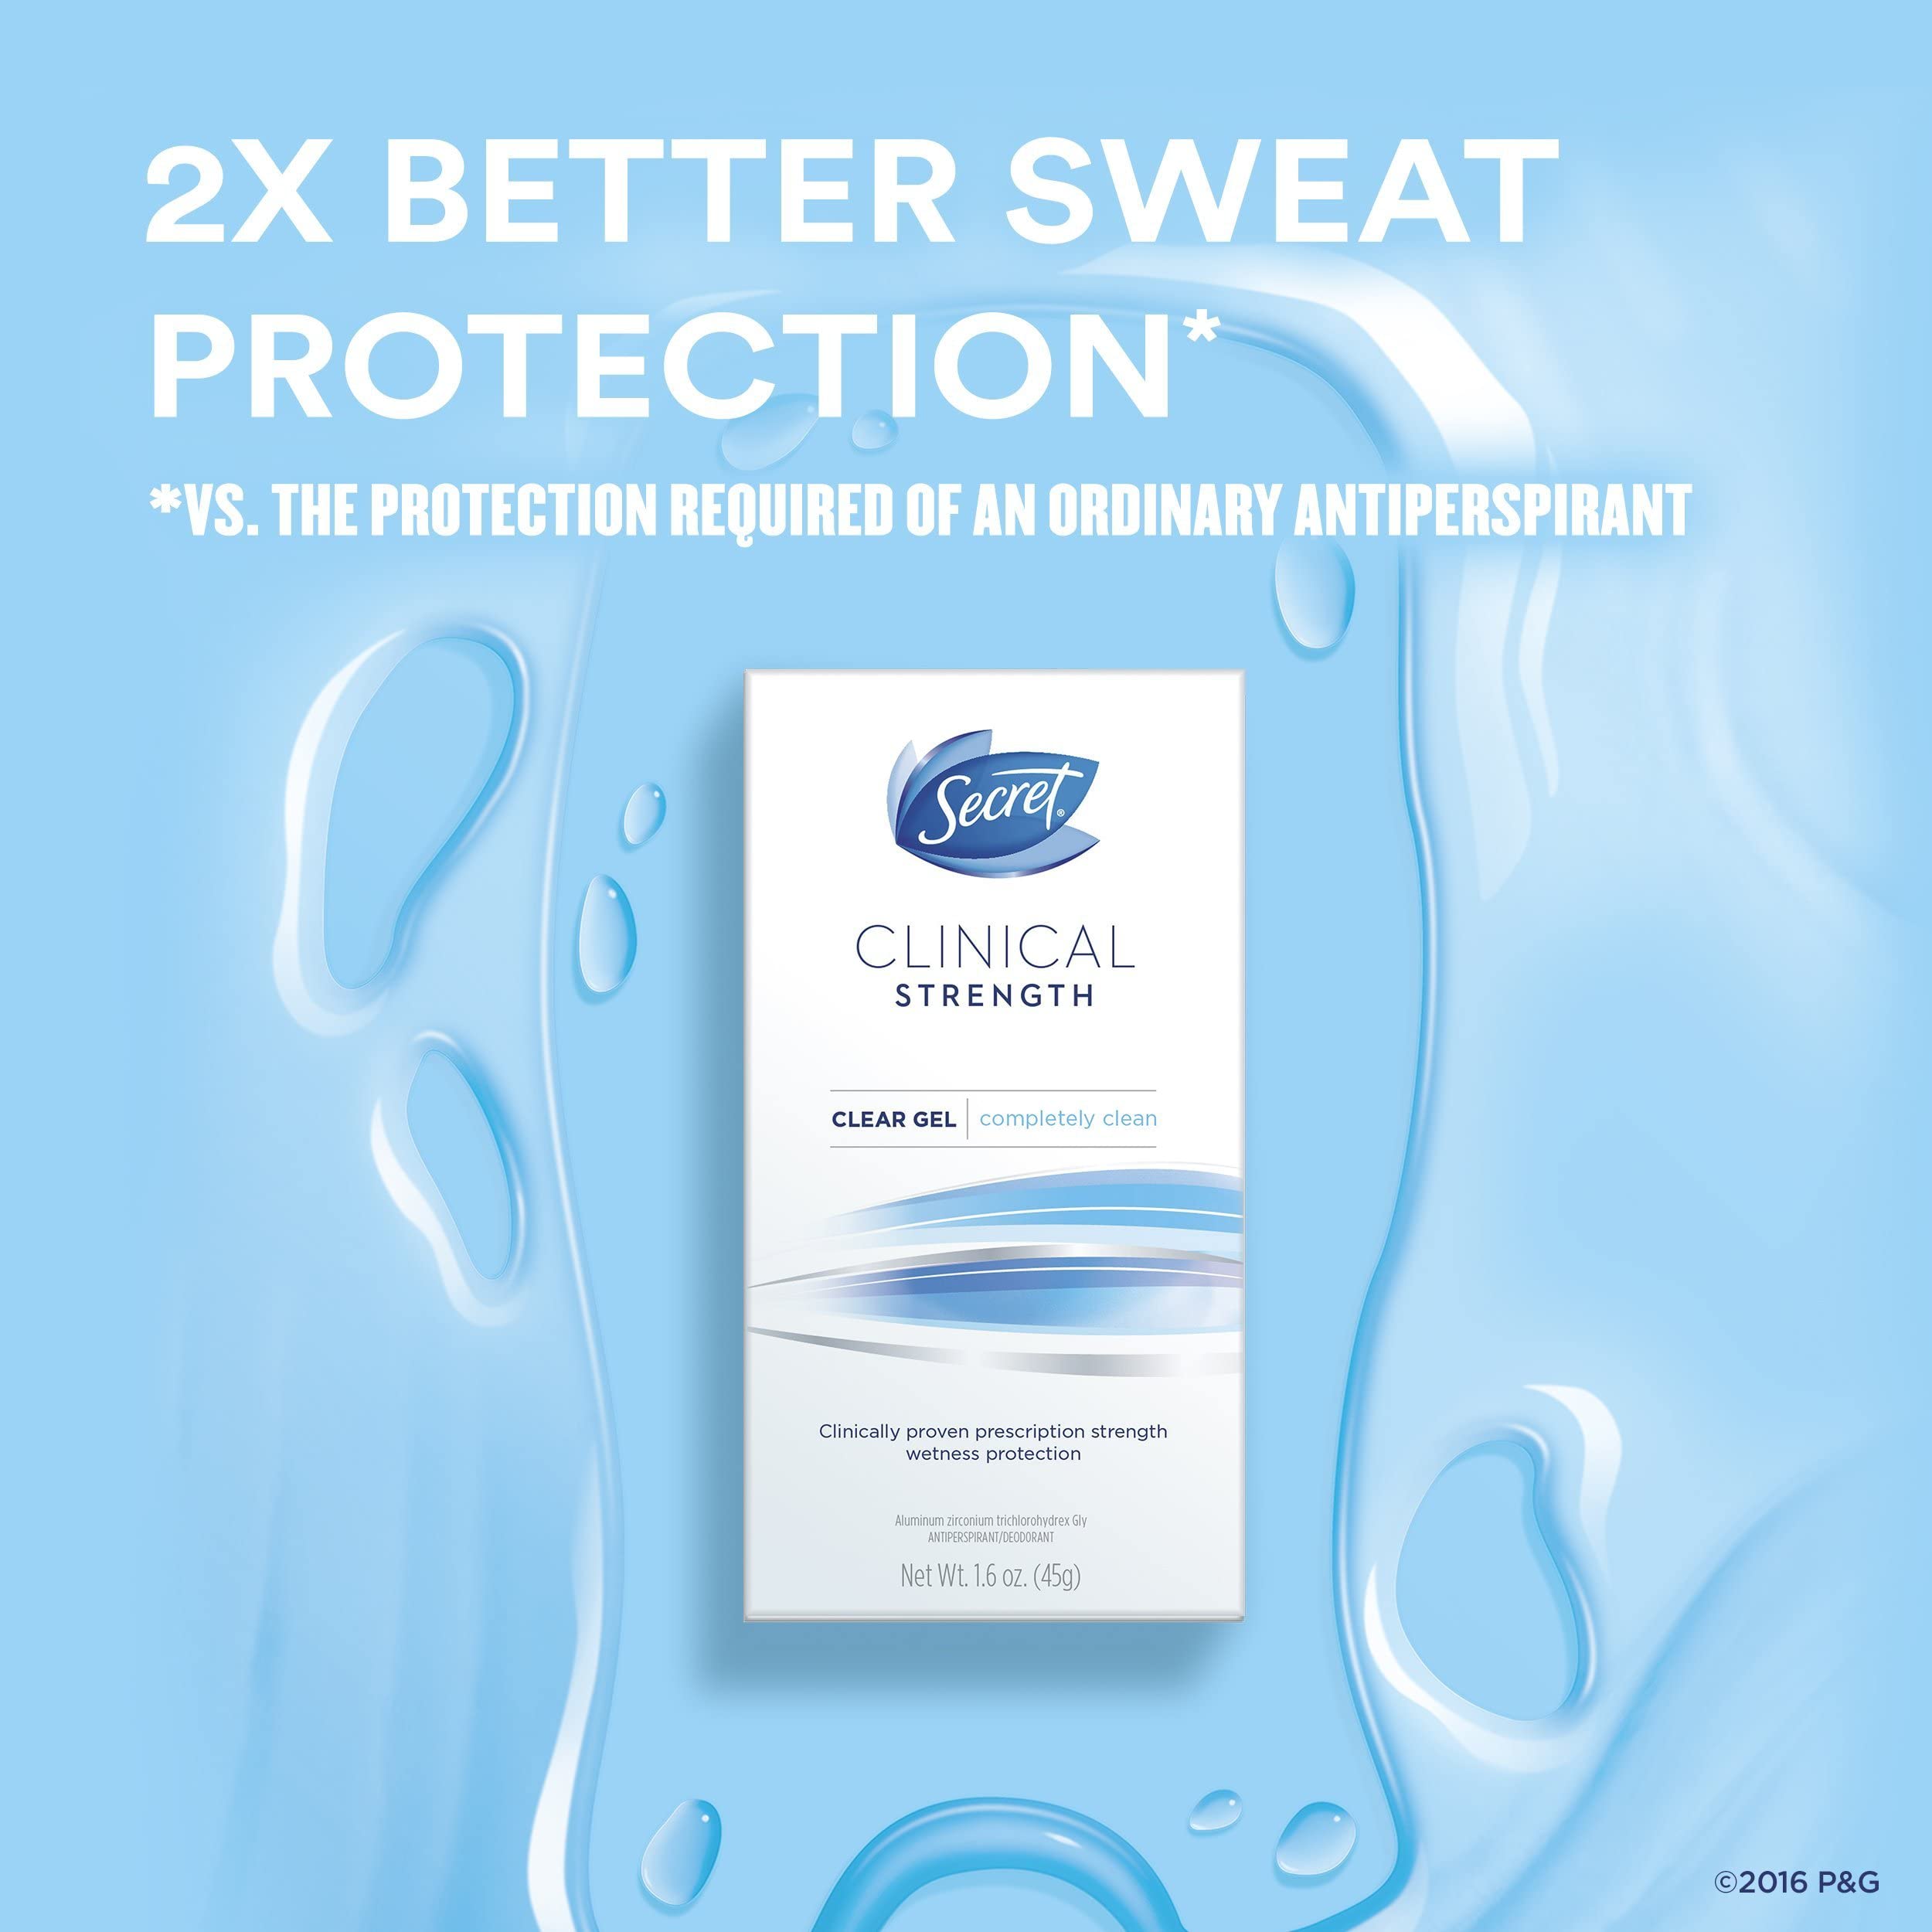 Secret Clinical Strength Deodorant and Antiperspirant for Women Clear Gel Completely Clean 2.6 Oz